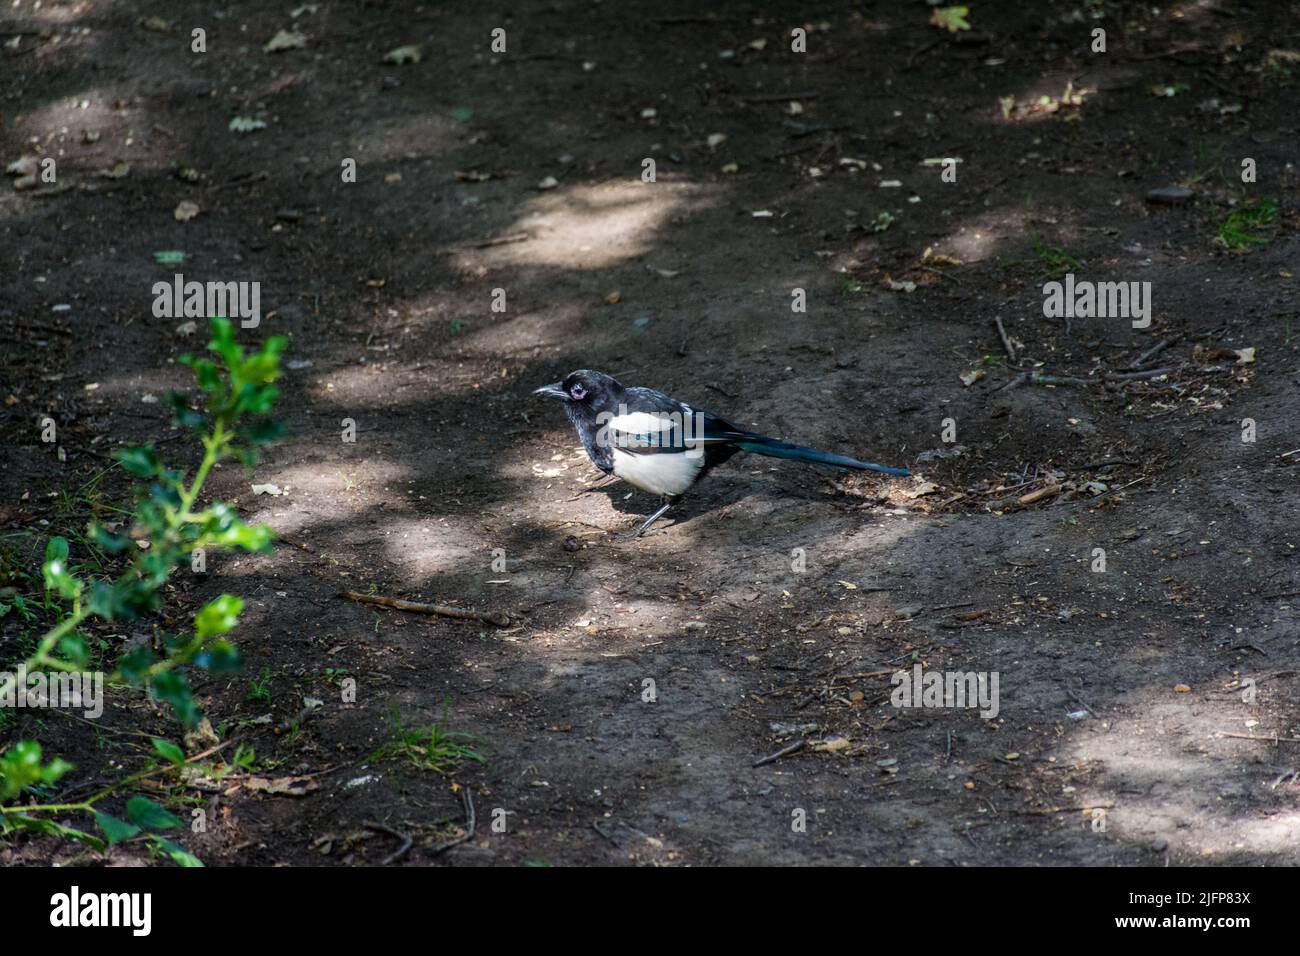 London, UK - 4 July 2022. A magpie at Hollow pond London, UK. 4 July 2022. Stock Photo